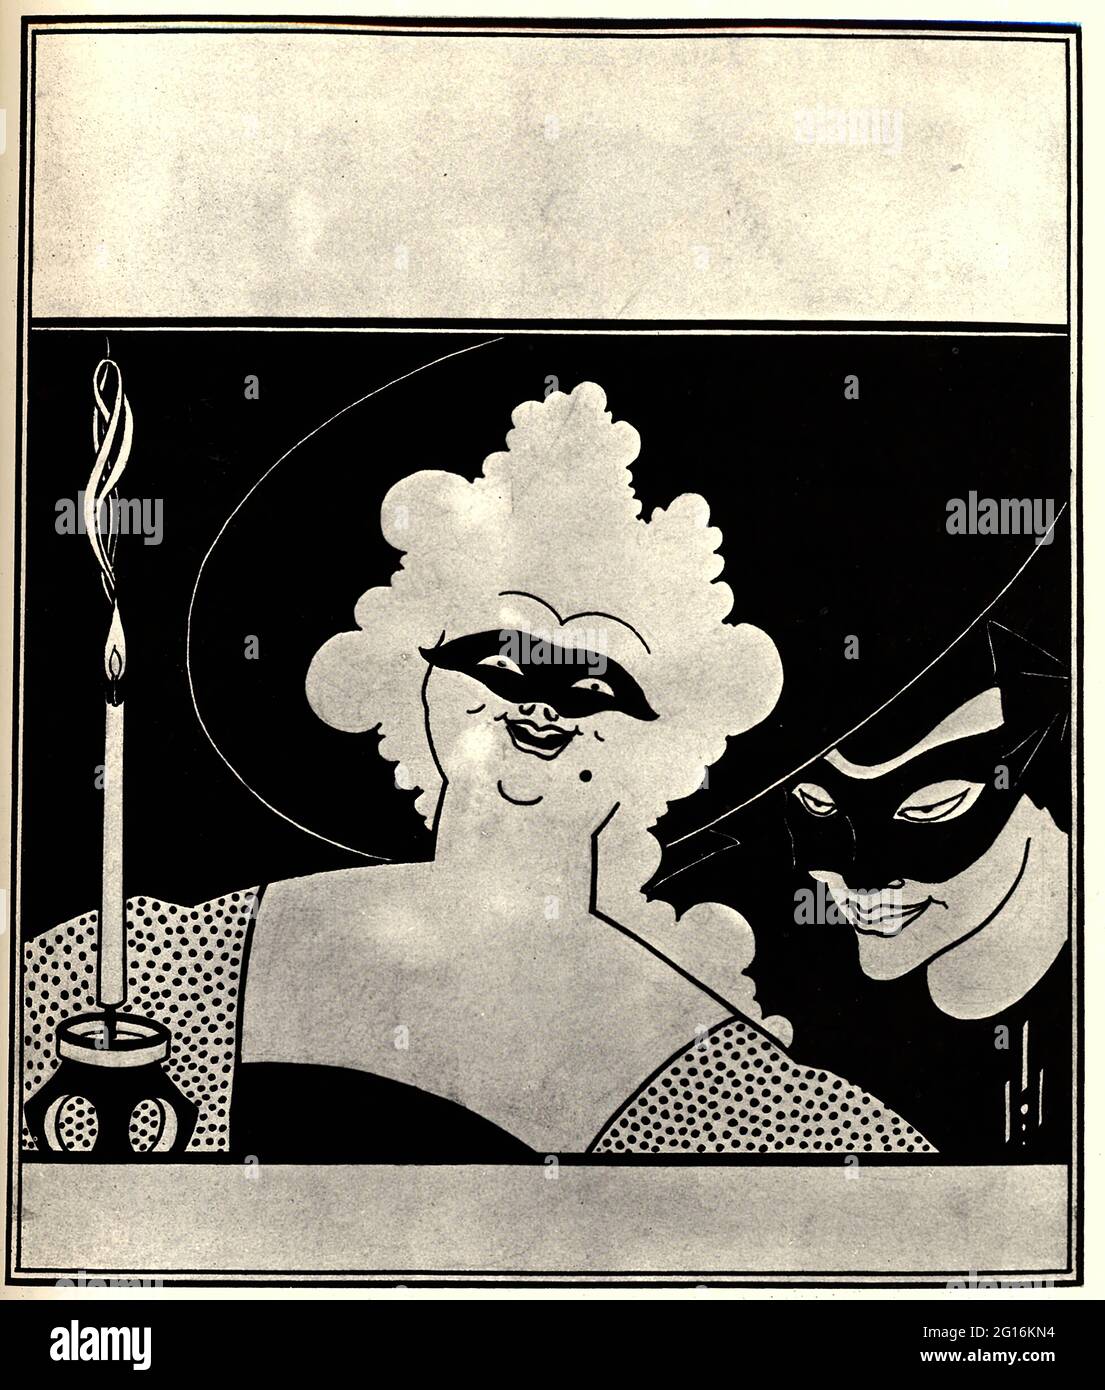 Aubrey Beardsley (1872-1898) - Frontispiece Yellow Book an Illustrated Quarterly 1894 Banque D'Images